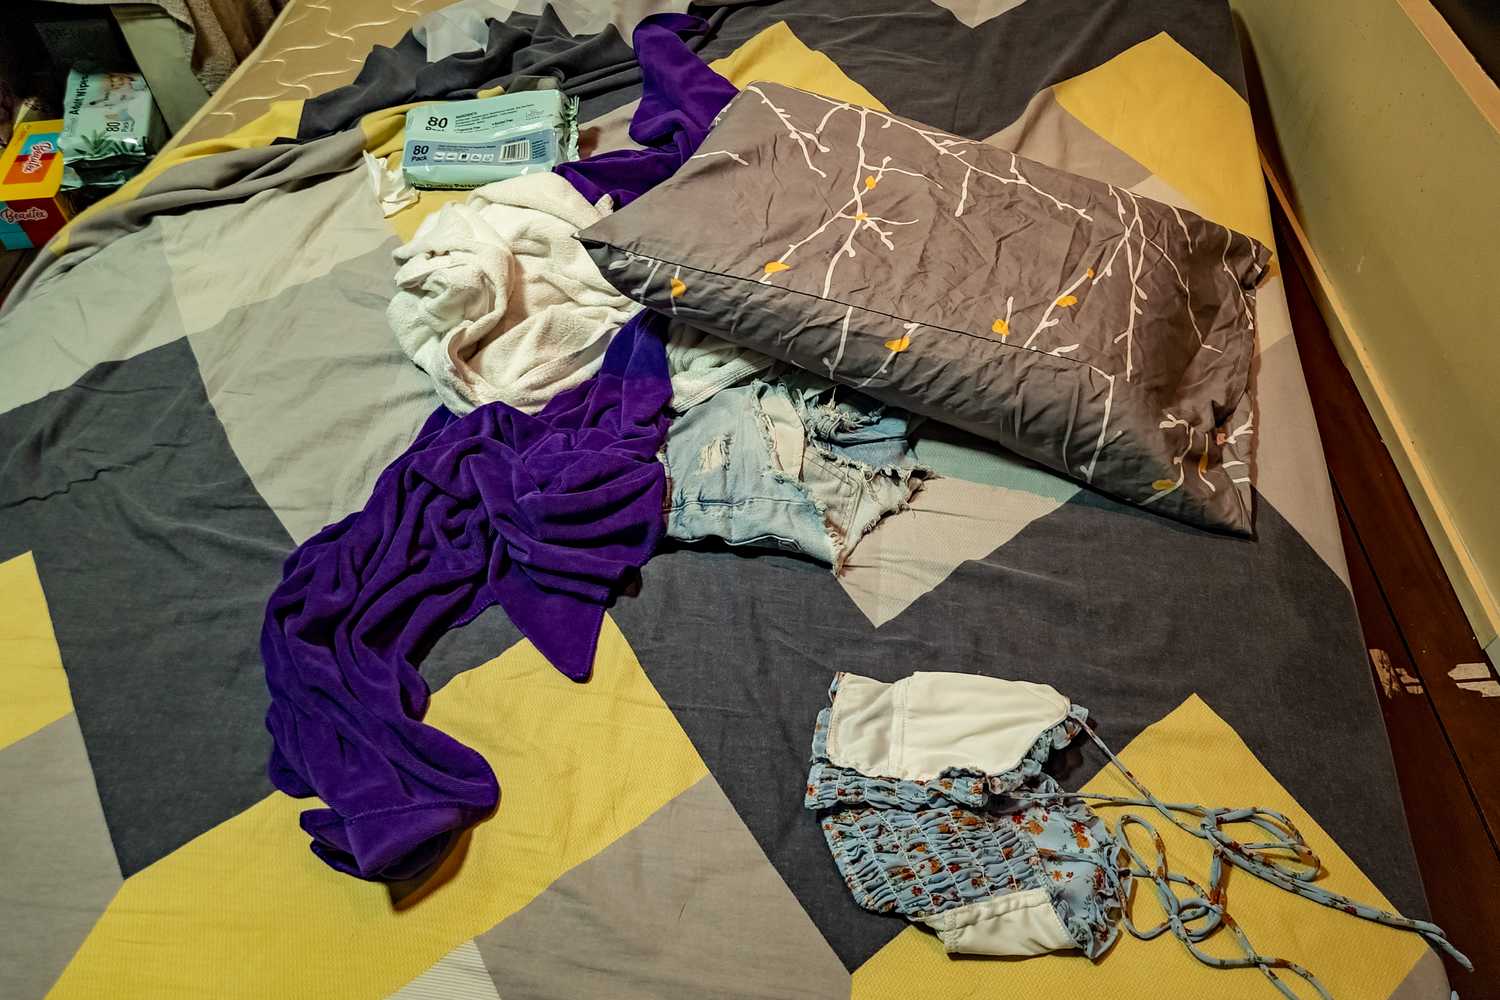 an image of a bed lying on the floor, with articles of clothing left in a messy state and baby wipes boxes beside it